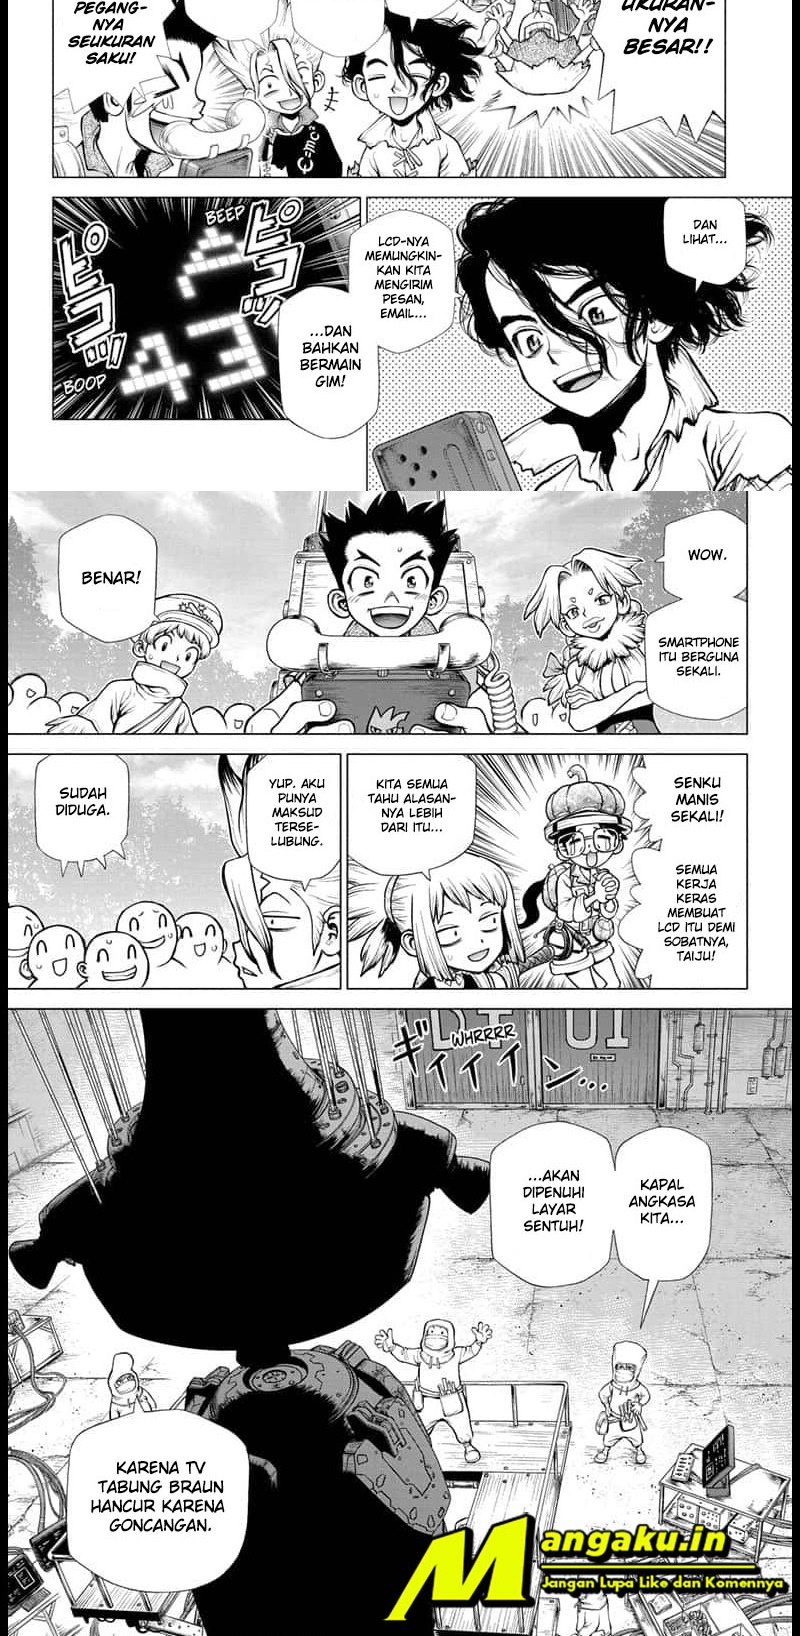 Dr Stone Chapter 222